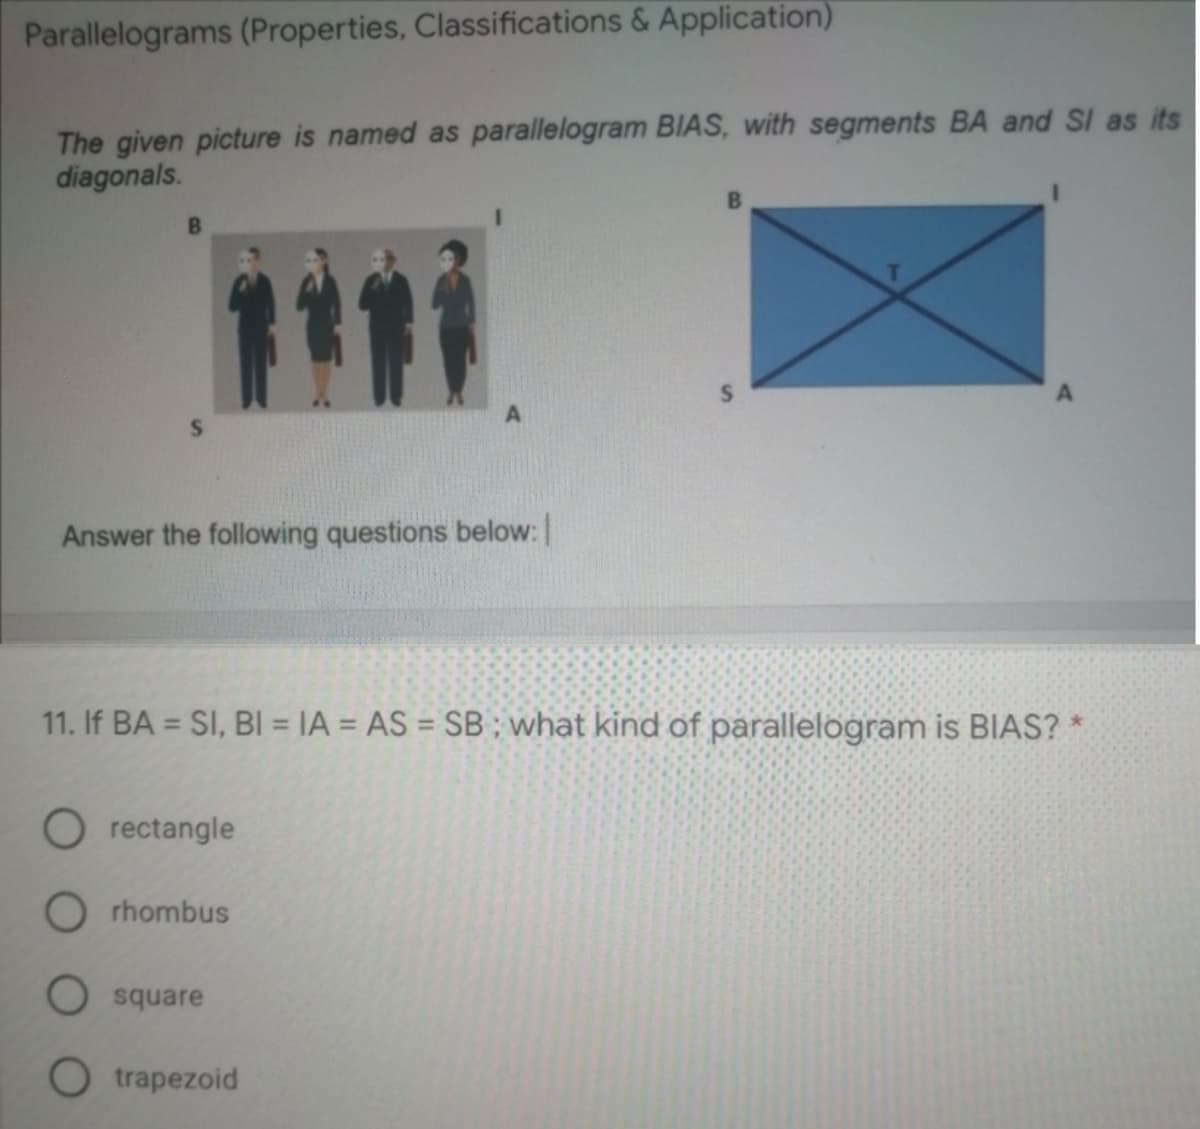 Parallelograms (Properties, Classifications & Application)
The given picture is named as parallelogram BIAS, with segments BA and SI as its
diagonals.
Answer the following questions below:
11. If BA = SI, BI = IA = AS = SB ; what kind of parallelogram is BIAS? *
%3D
O rectangle
O rhombus
O square
O trapezoid
